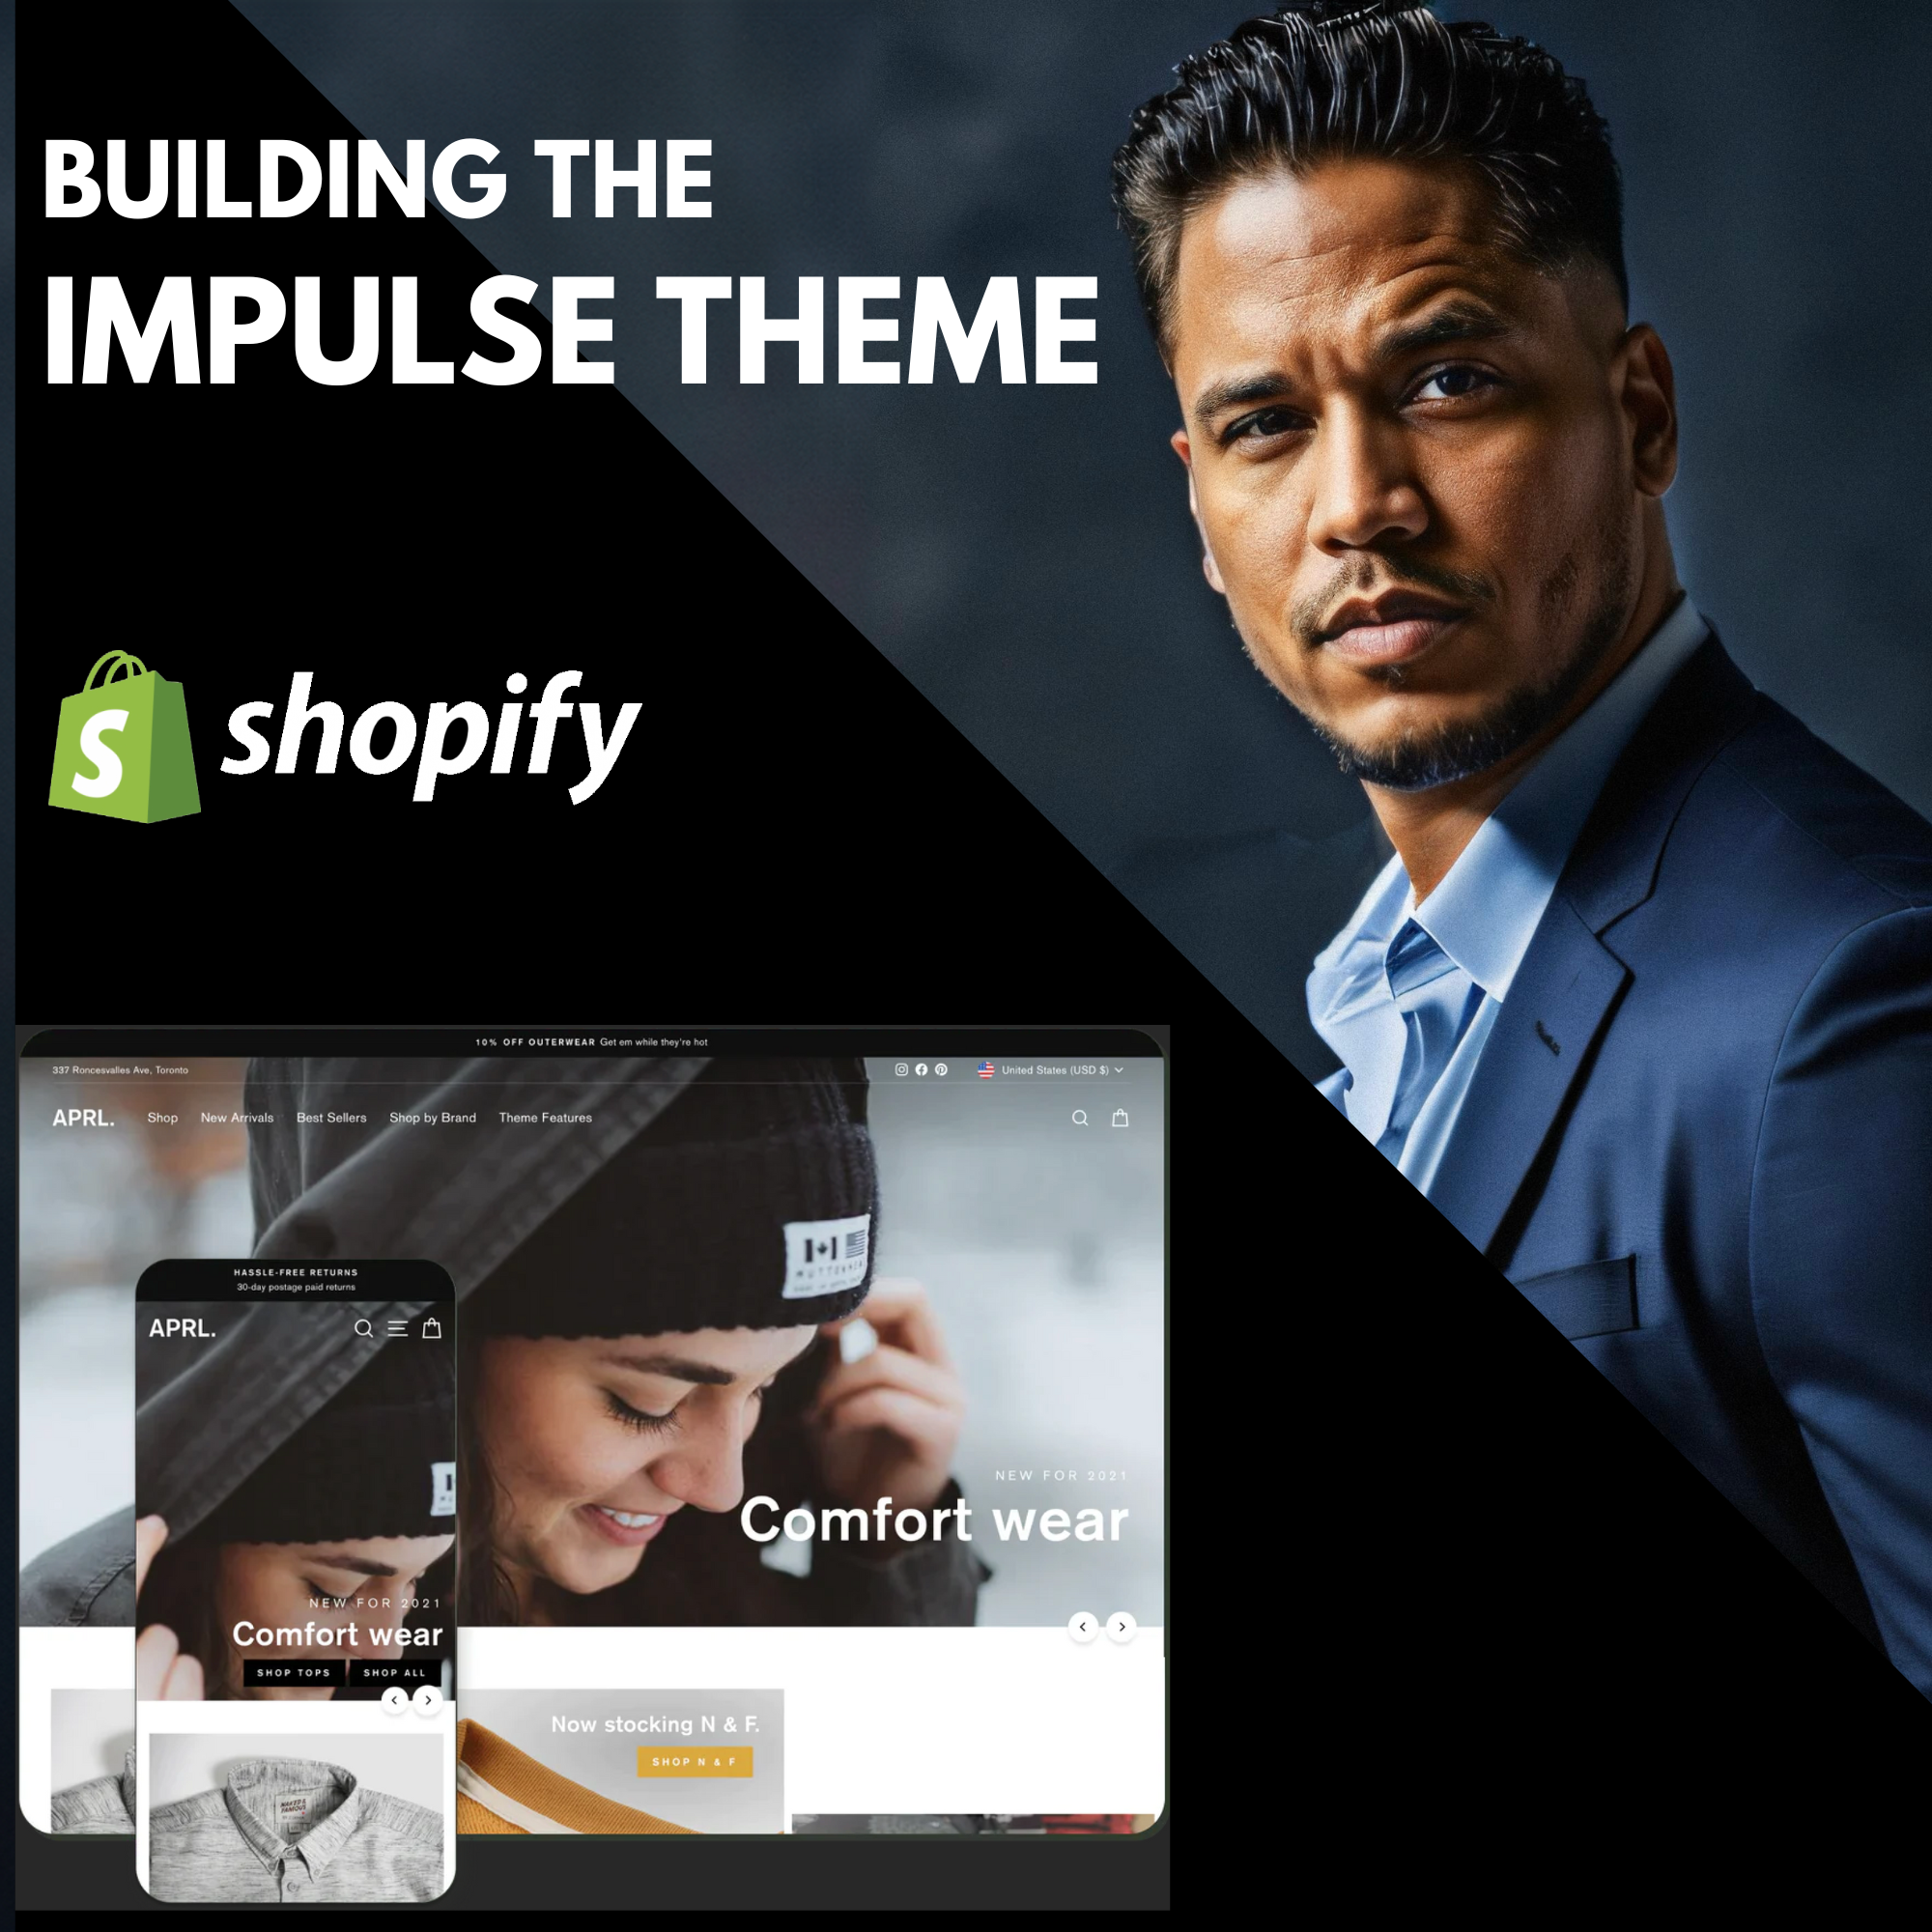 Building the Impulse Theme with Shopify